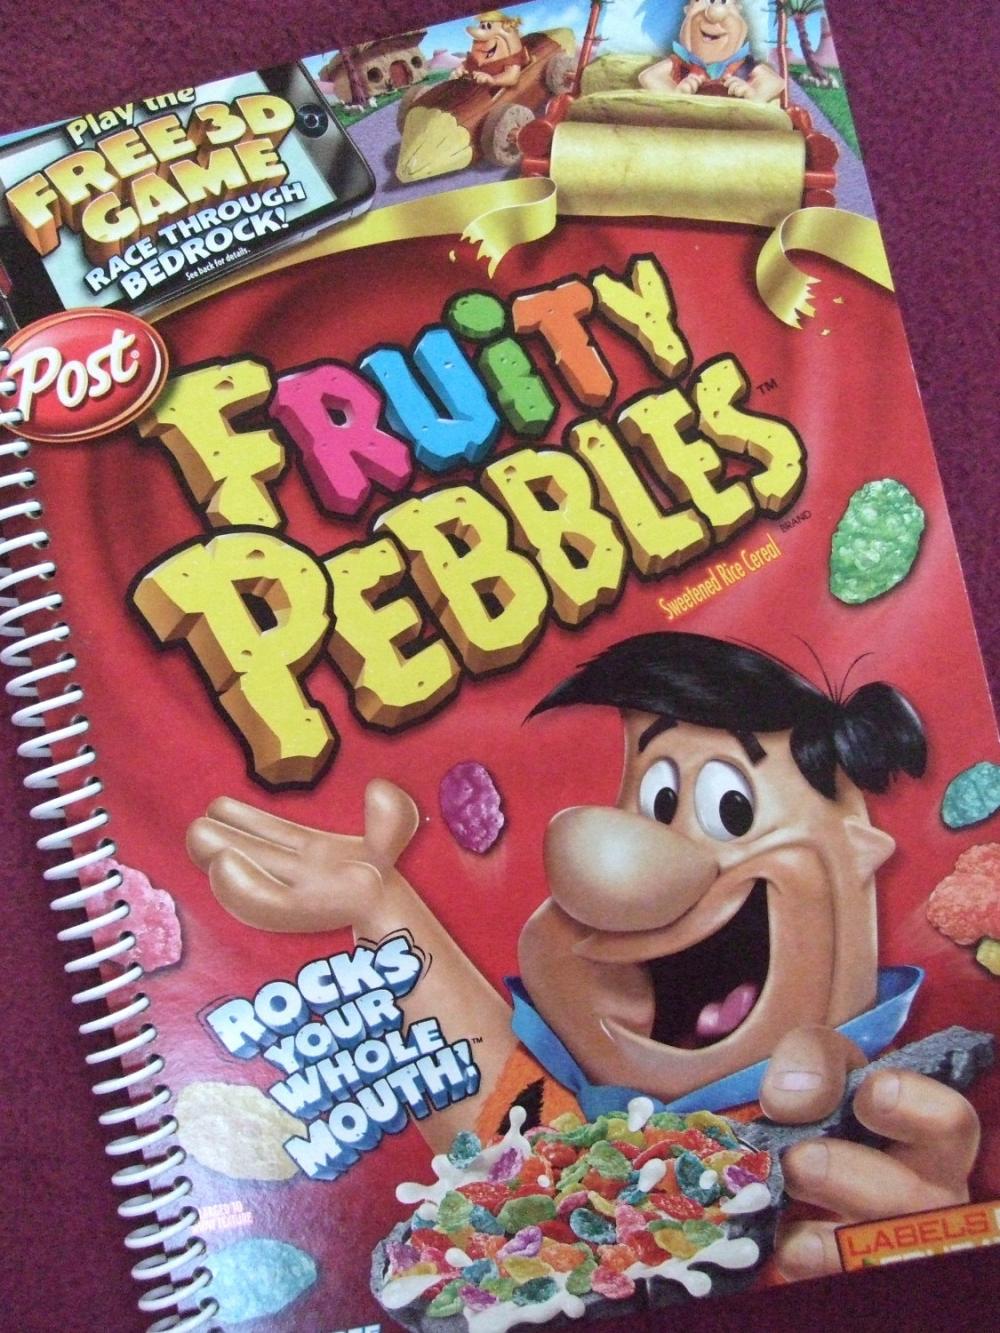 Notebook Flintstones Fruity Pebbles Cereal Upcycled Spiral Notebook Journal - Recyled Earth Friendly